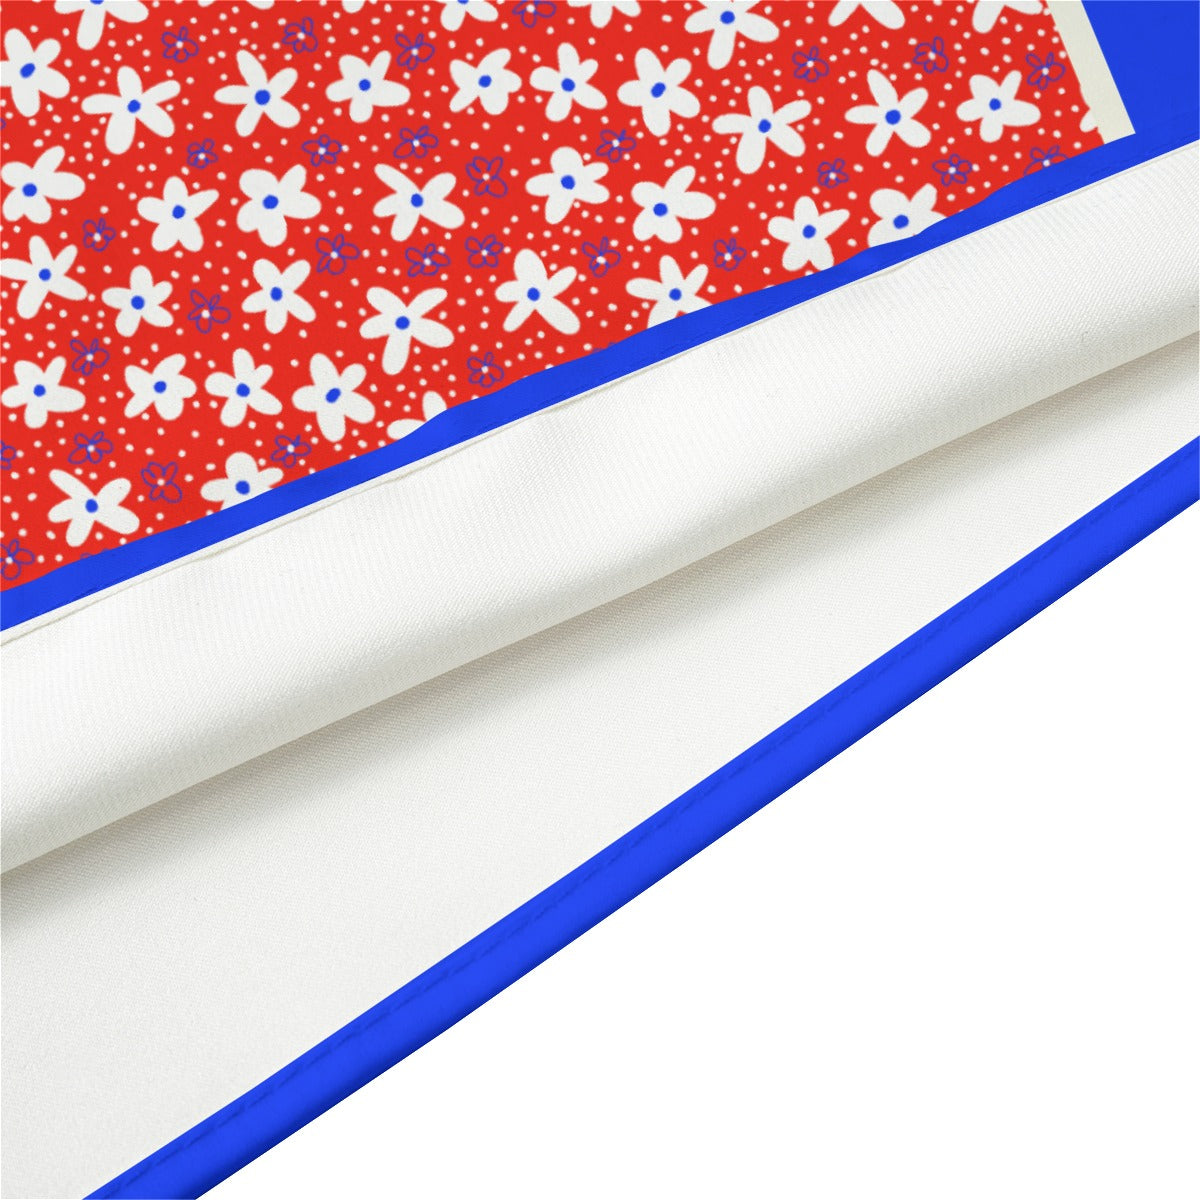 American inspired Silk Scarf. Design hand-painted by the Designer Maria Alejandra Echenique